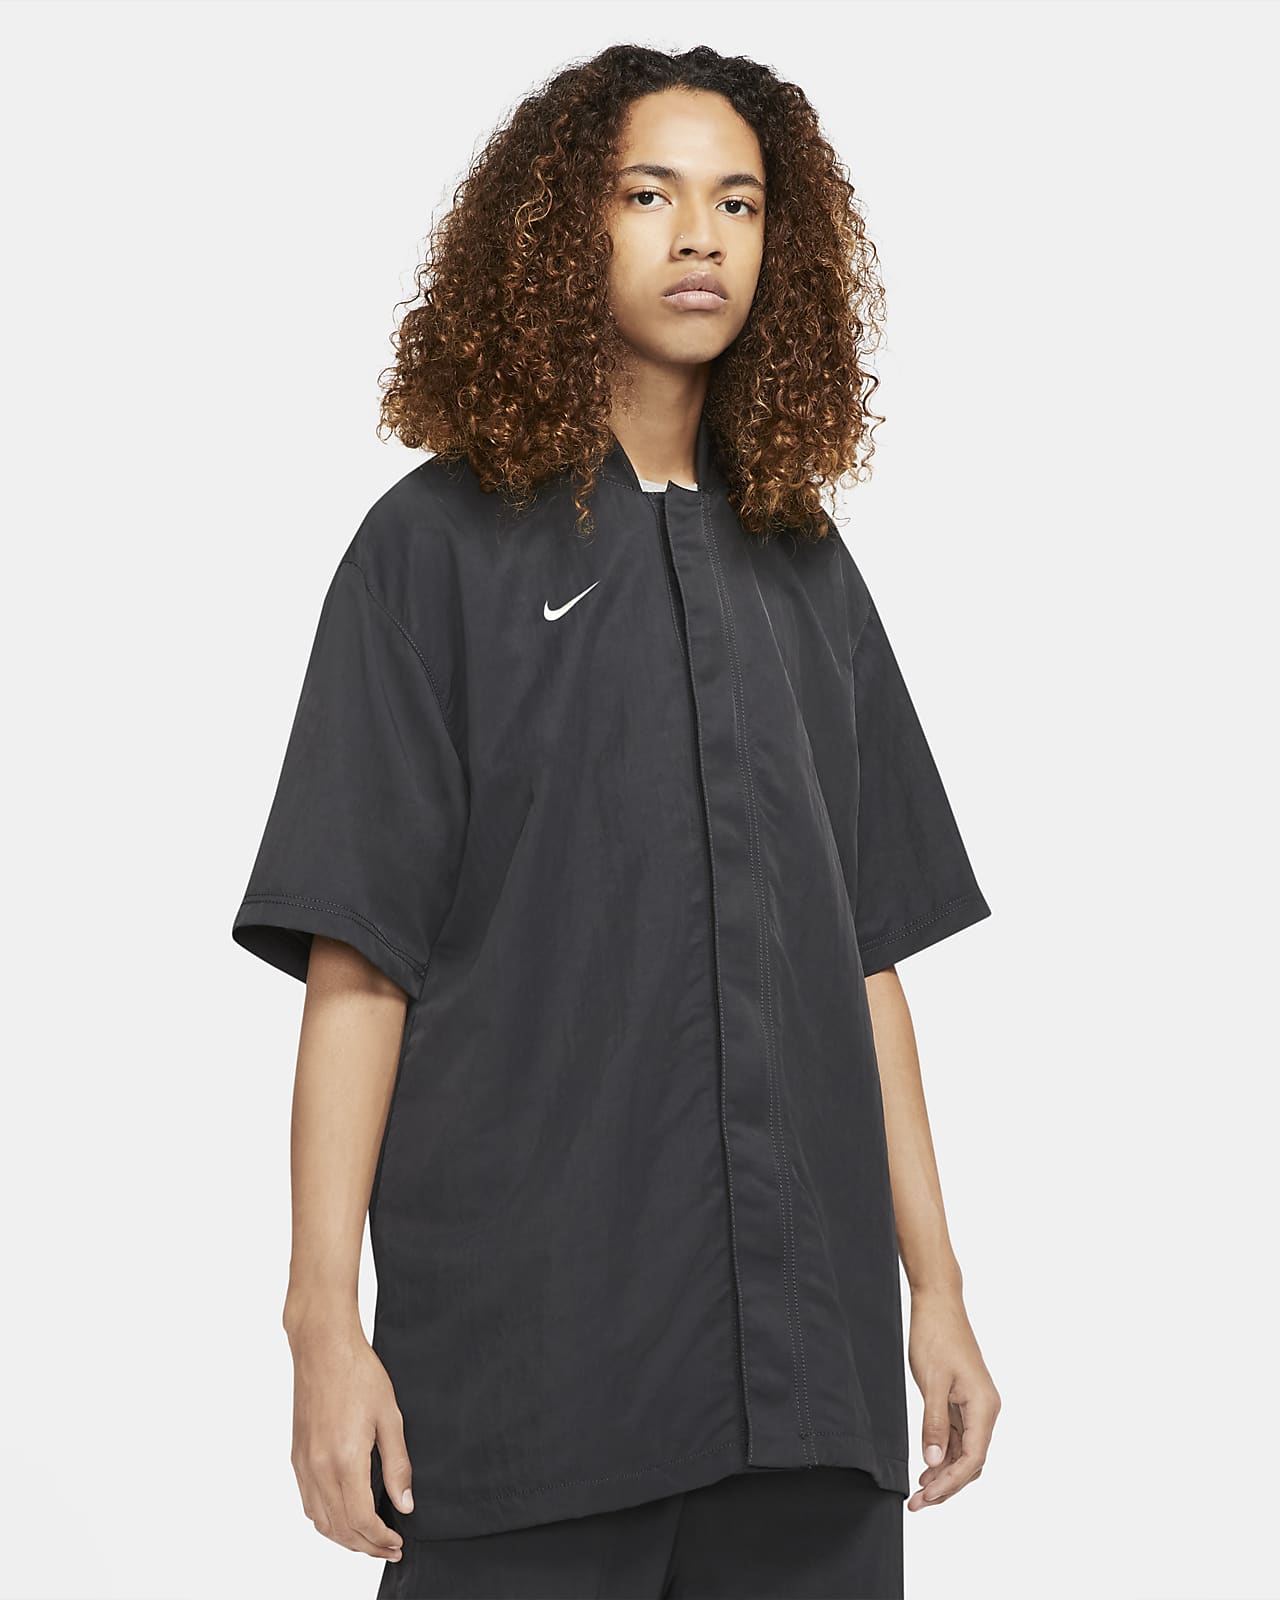 fear of god warm up top